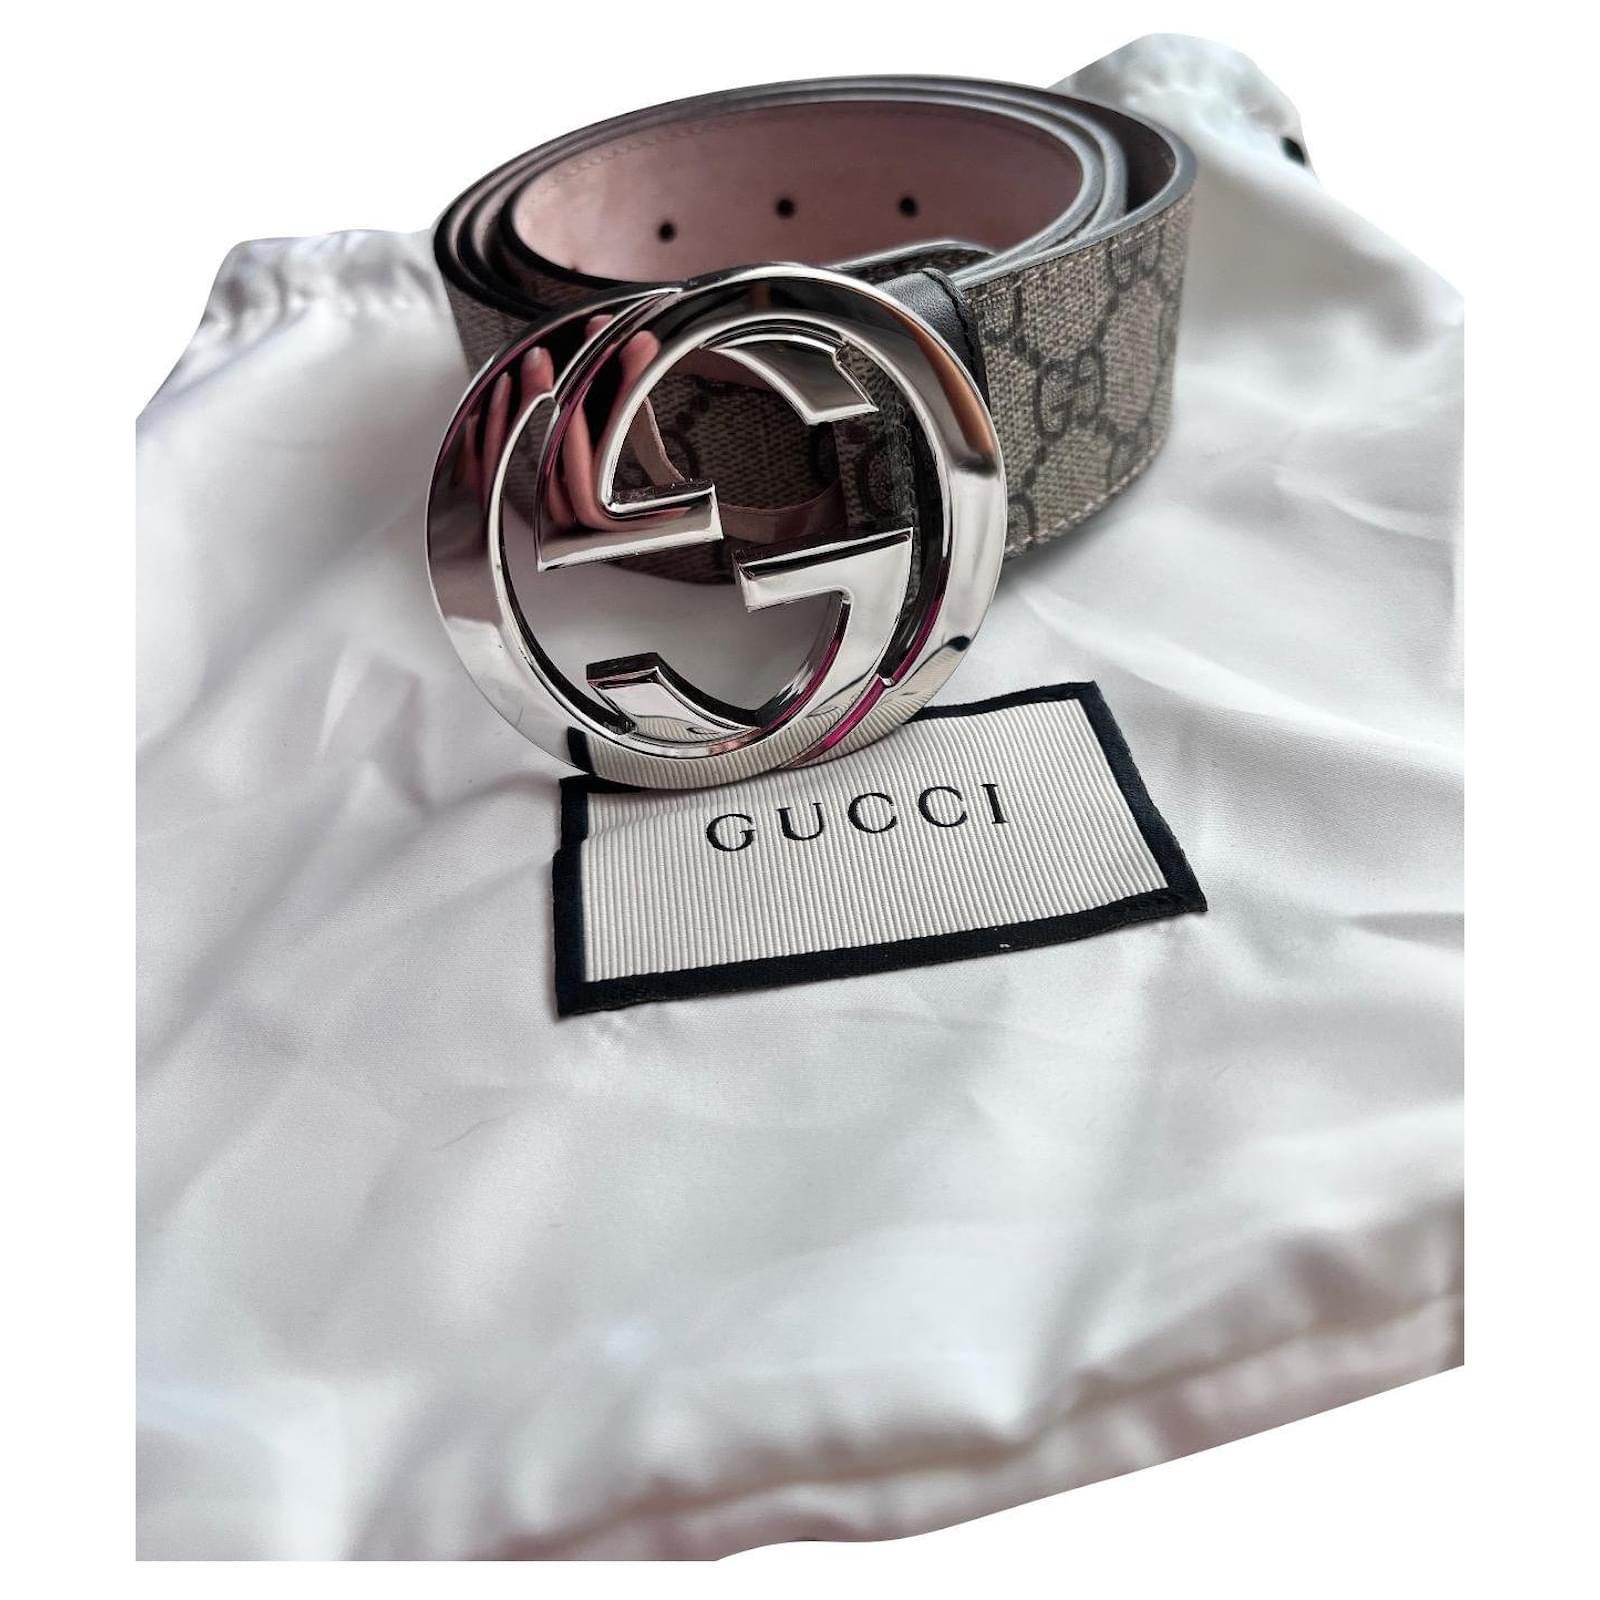 Gucci GG Supreme Beige Belt with Silver GG Buckle